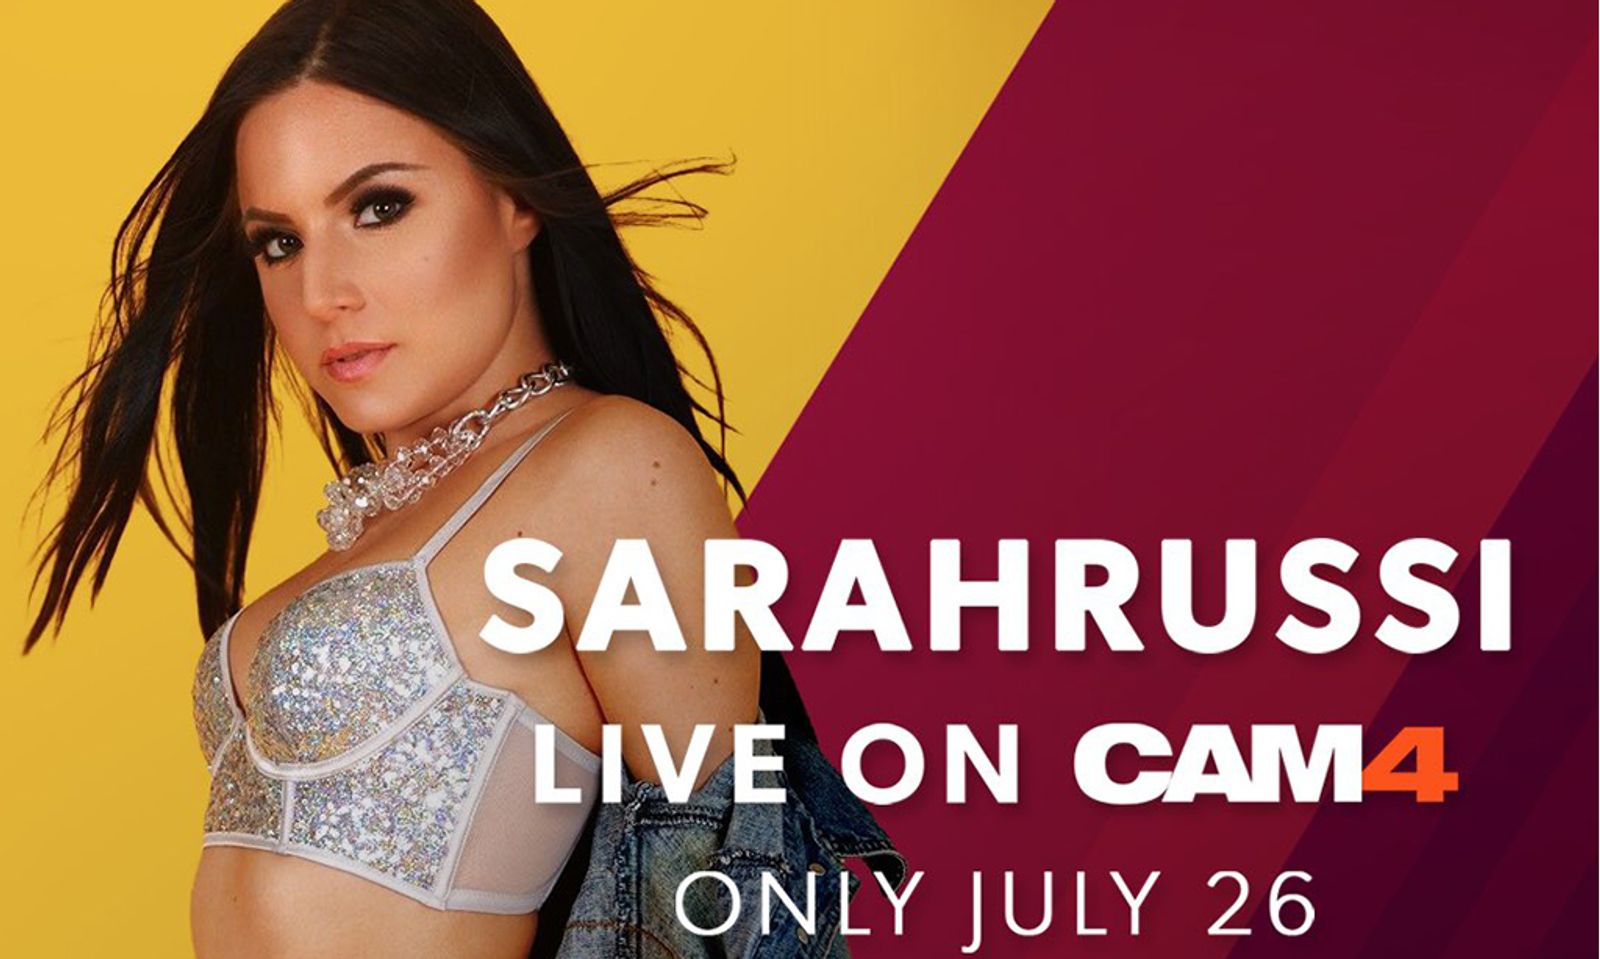 Cam Starlet Sarah Russi to Give Show on Cam4 Tonight